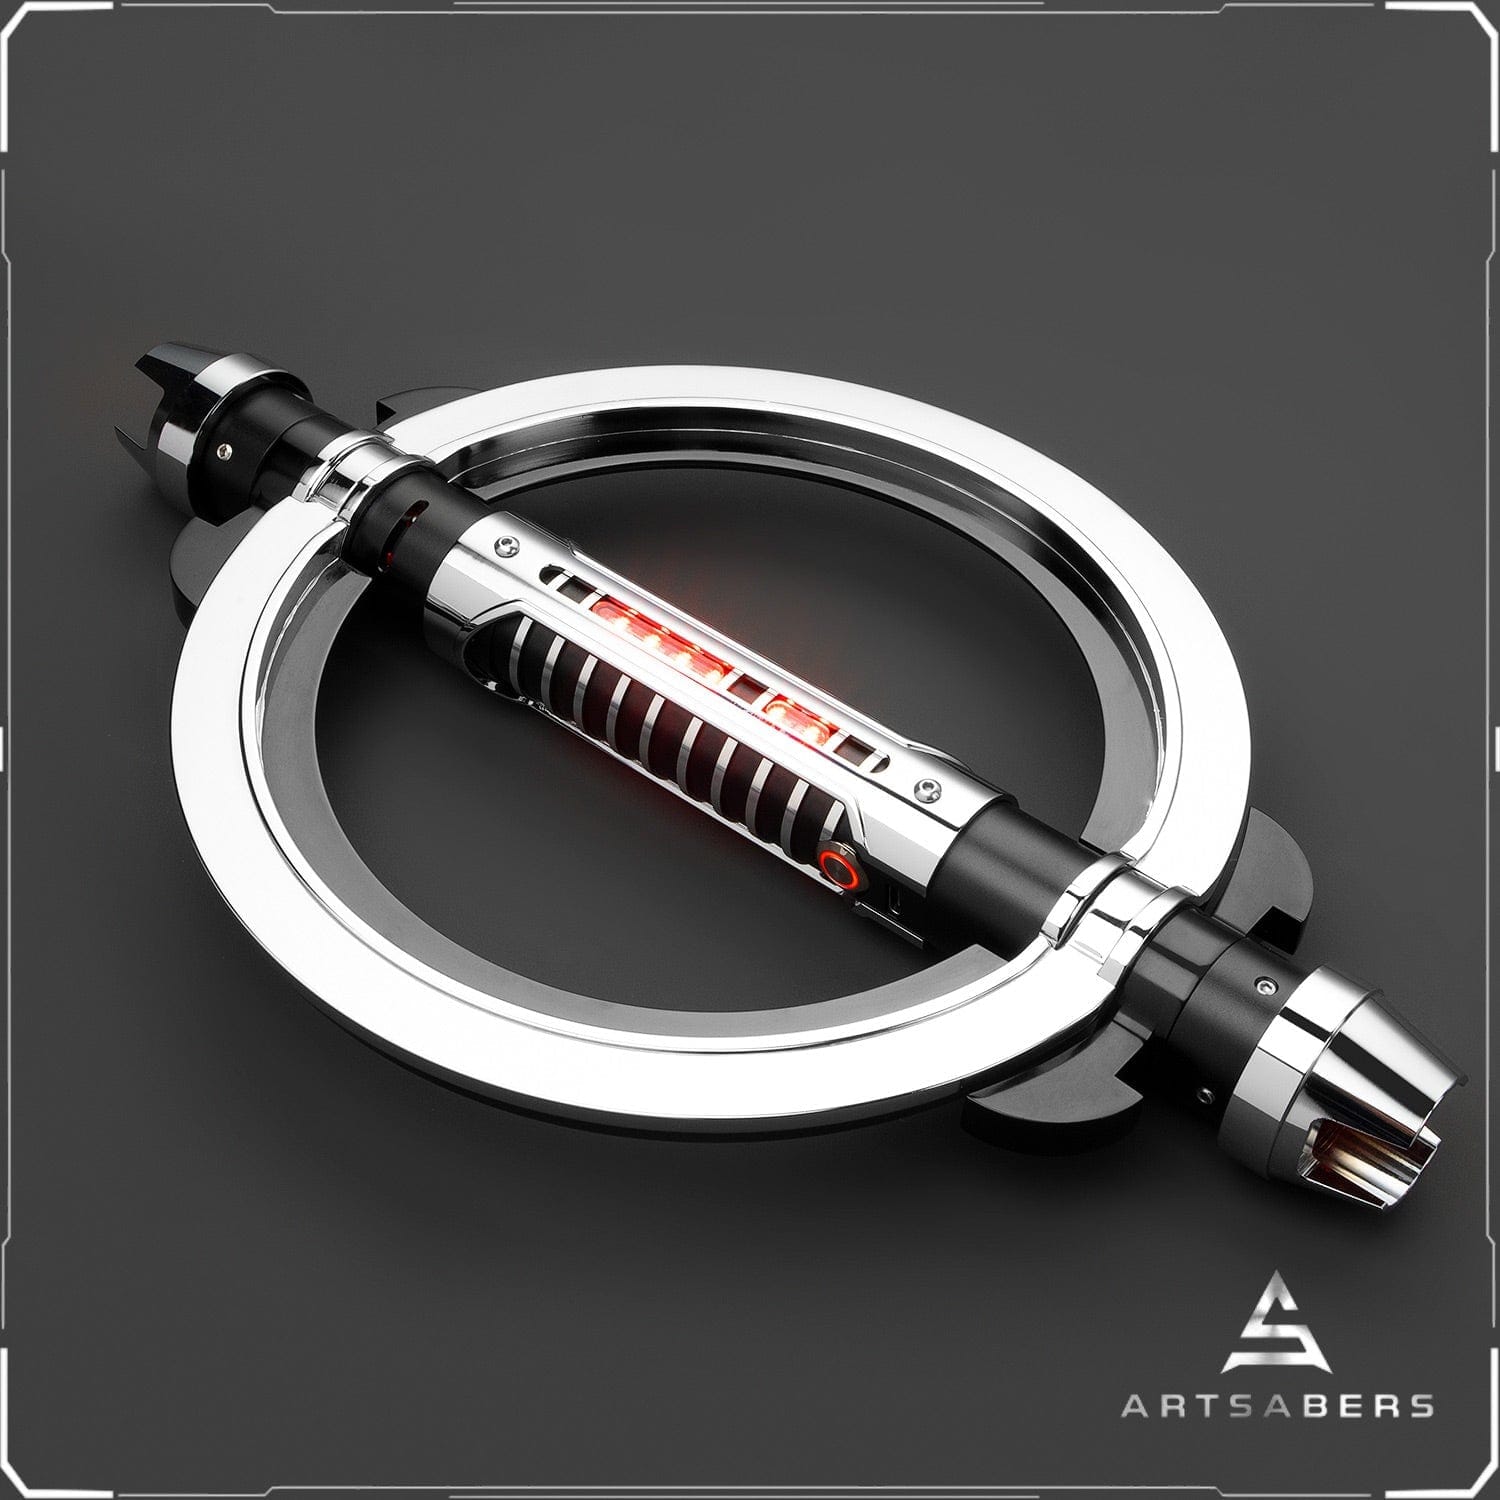 Grand Inquisitor Lightsaber Base Lit Lightsaber For Heavy Dueling Movie Replica ARTSABERS 